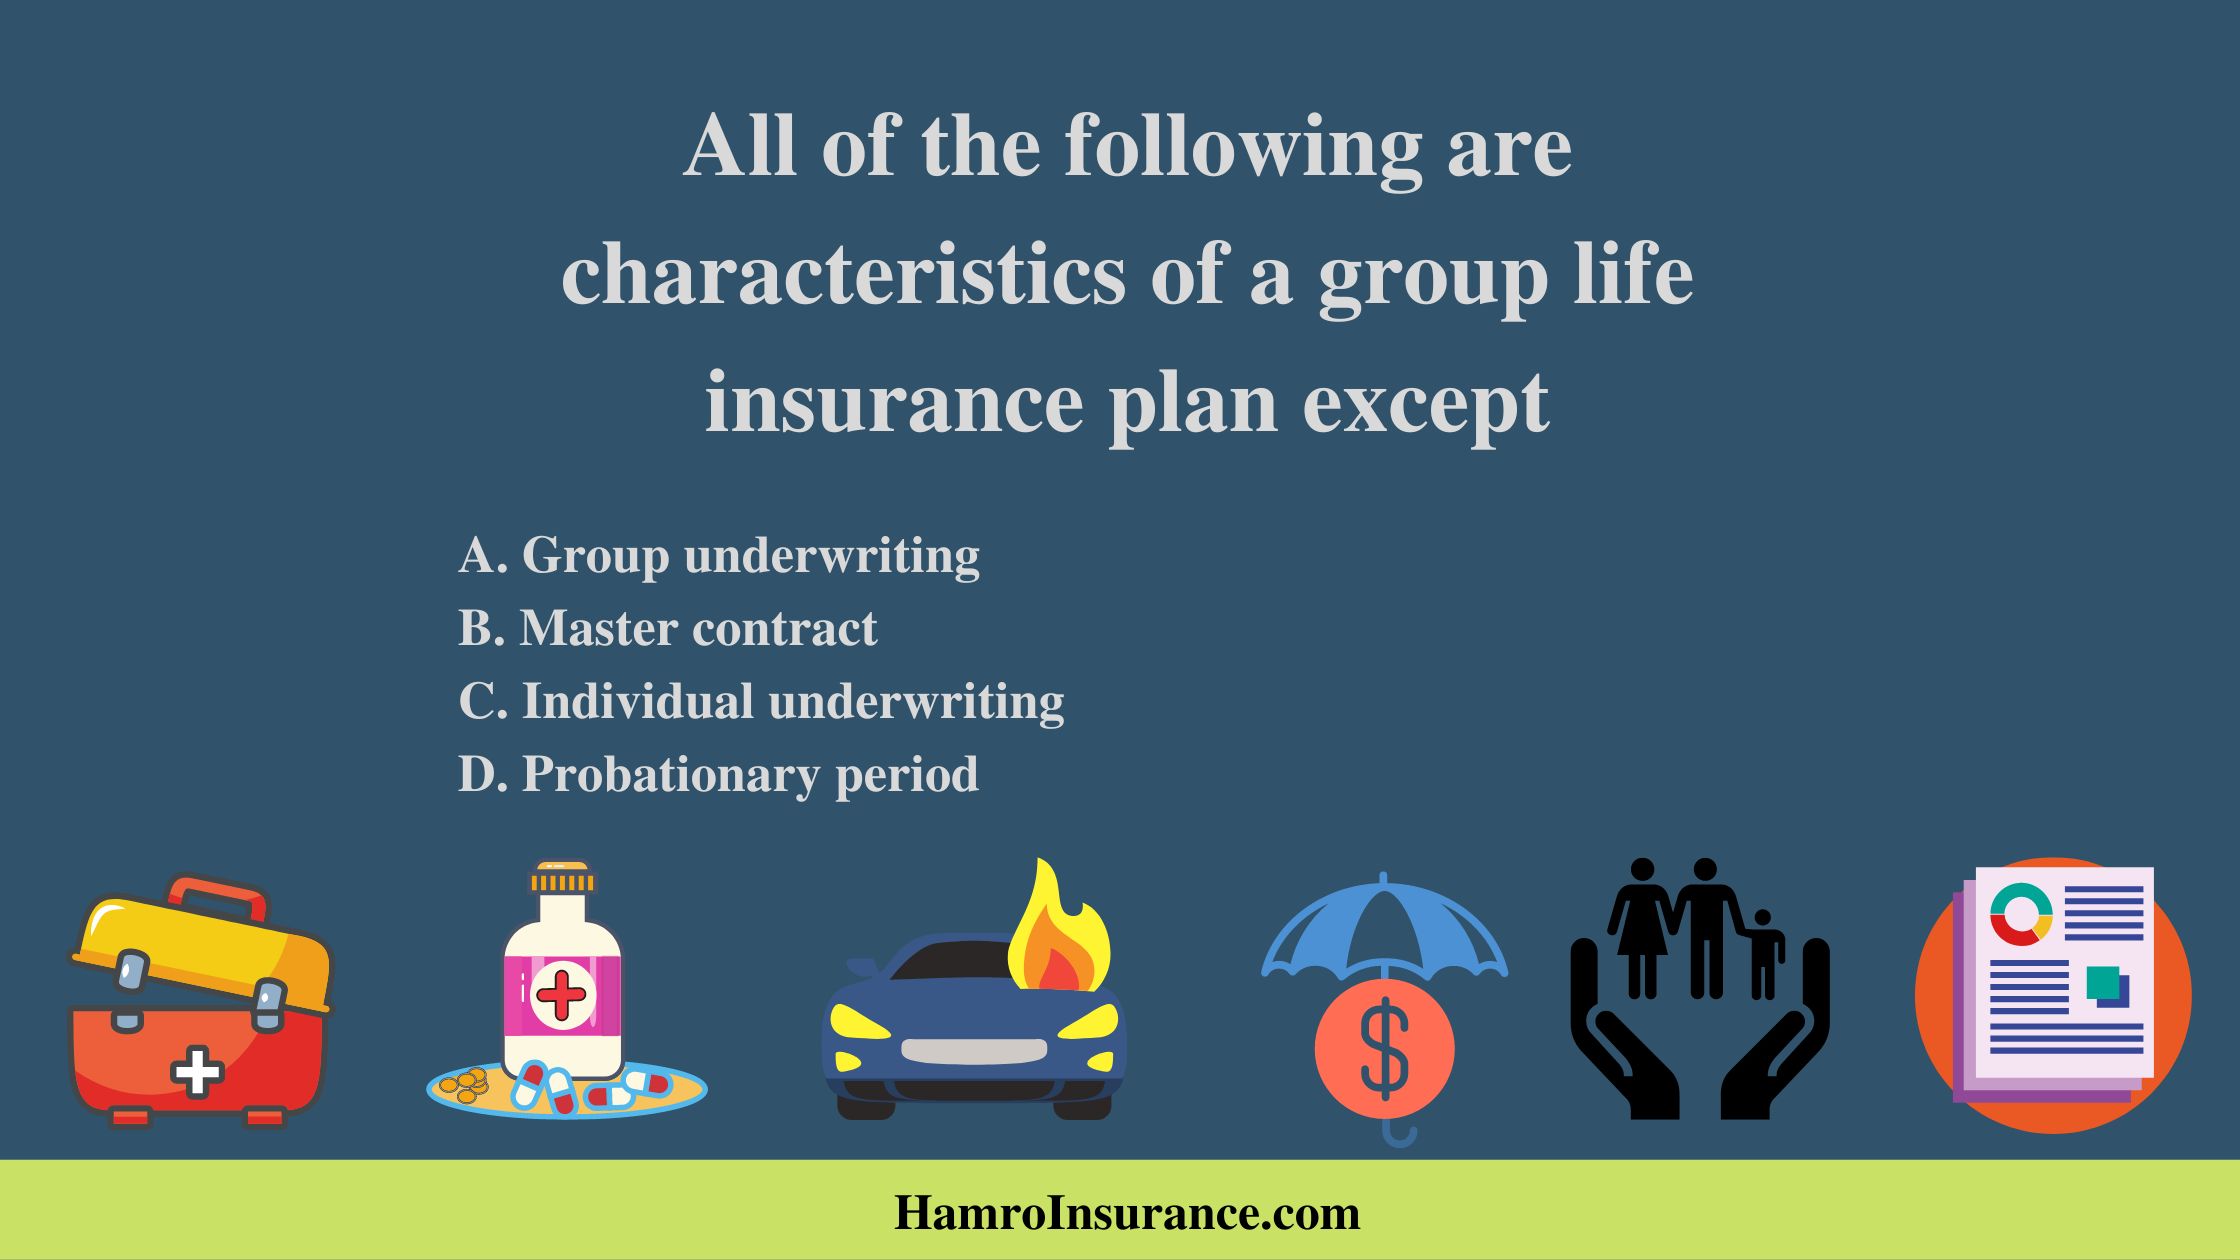 All of the following are characteristics of a group life insurance plan except